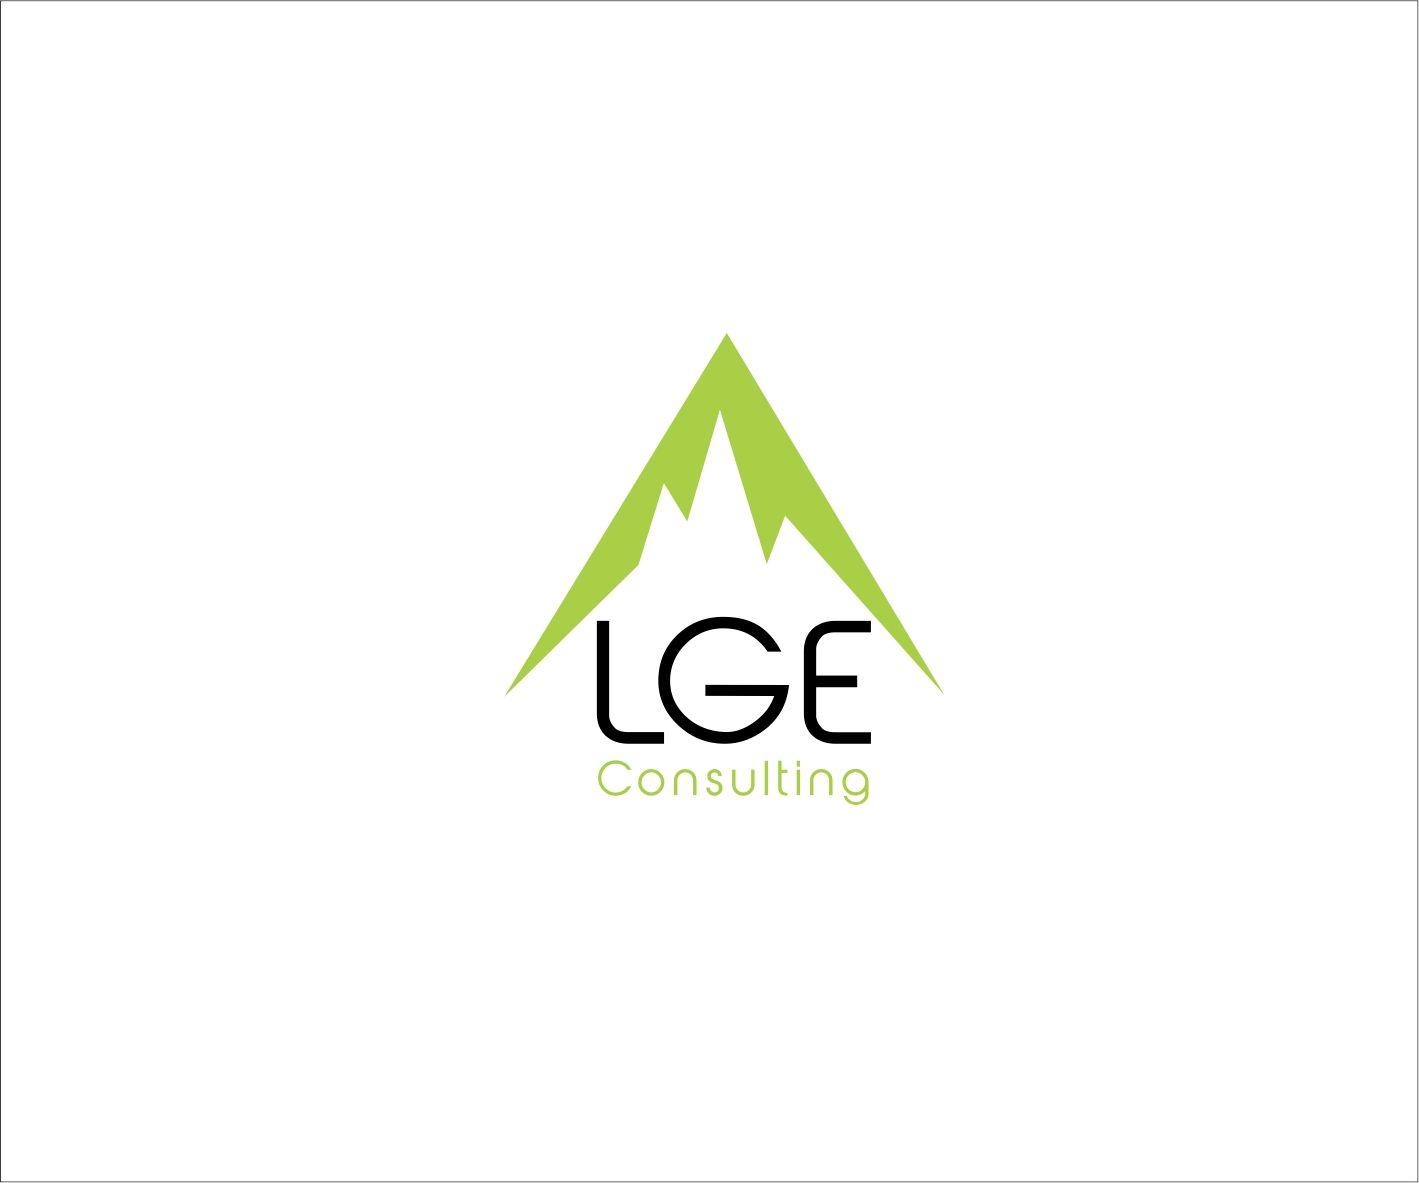 LGE Logo - Serious, Professional, Business Logo Design for LGE Consulting